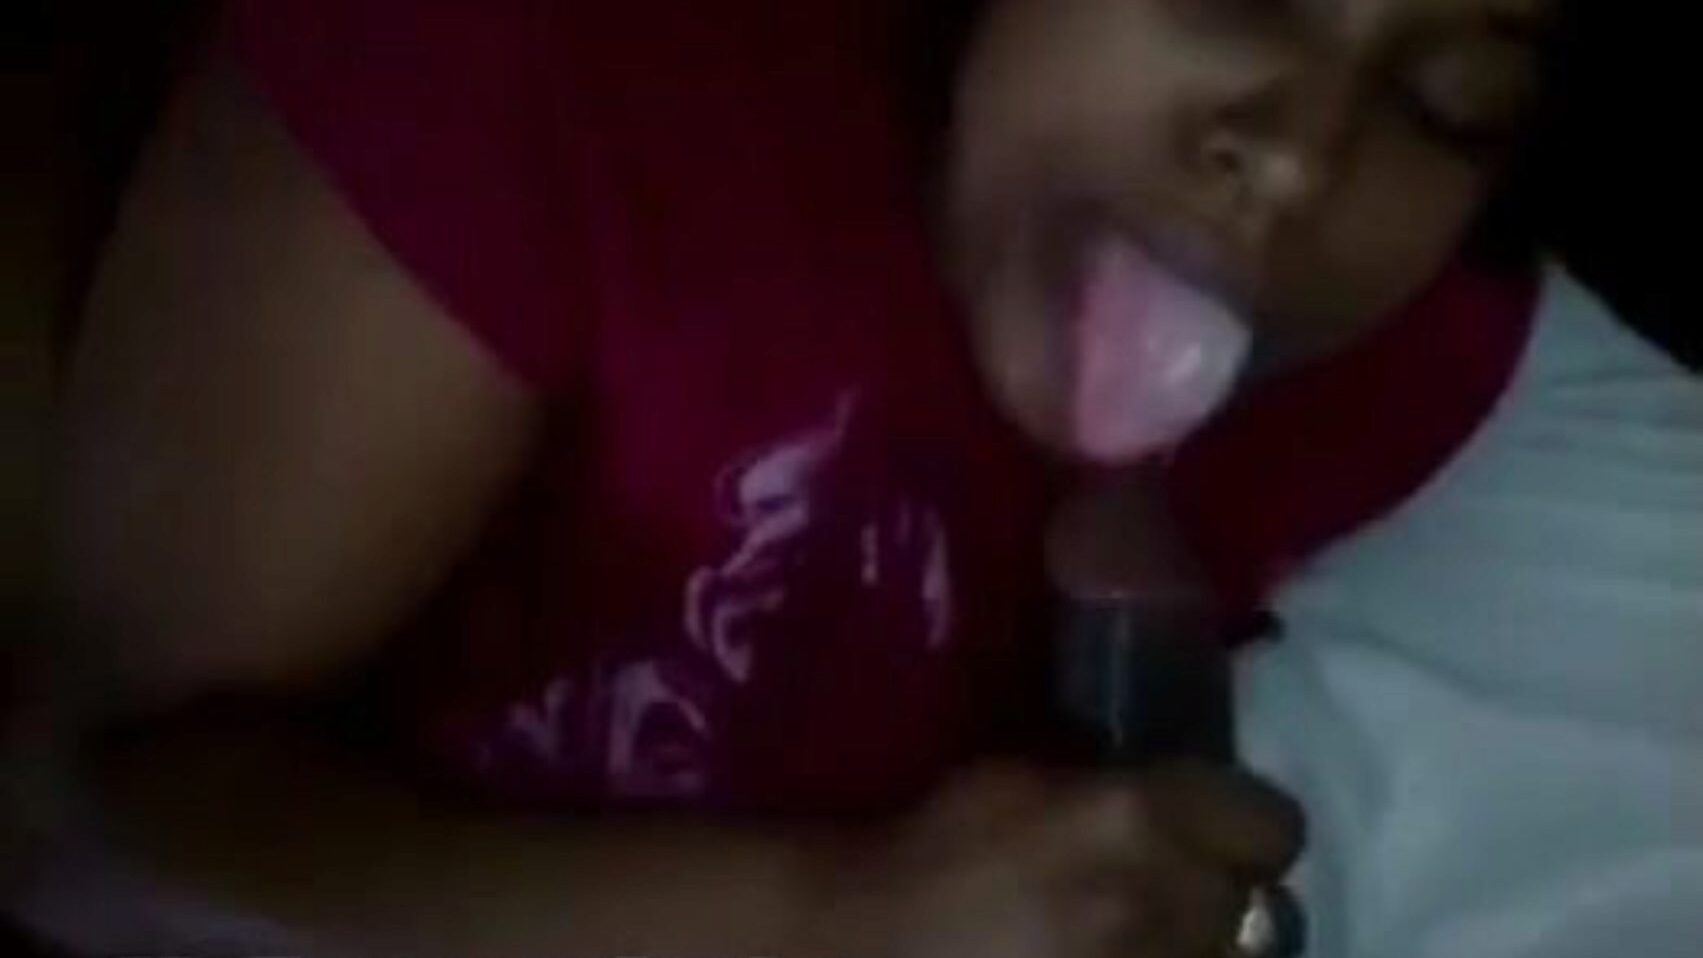 Mz Tongue Act Early Morning Classic Oral-Stimulation & Facial! - BlackPussy.com